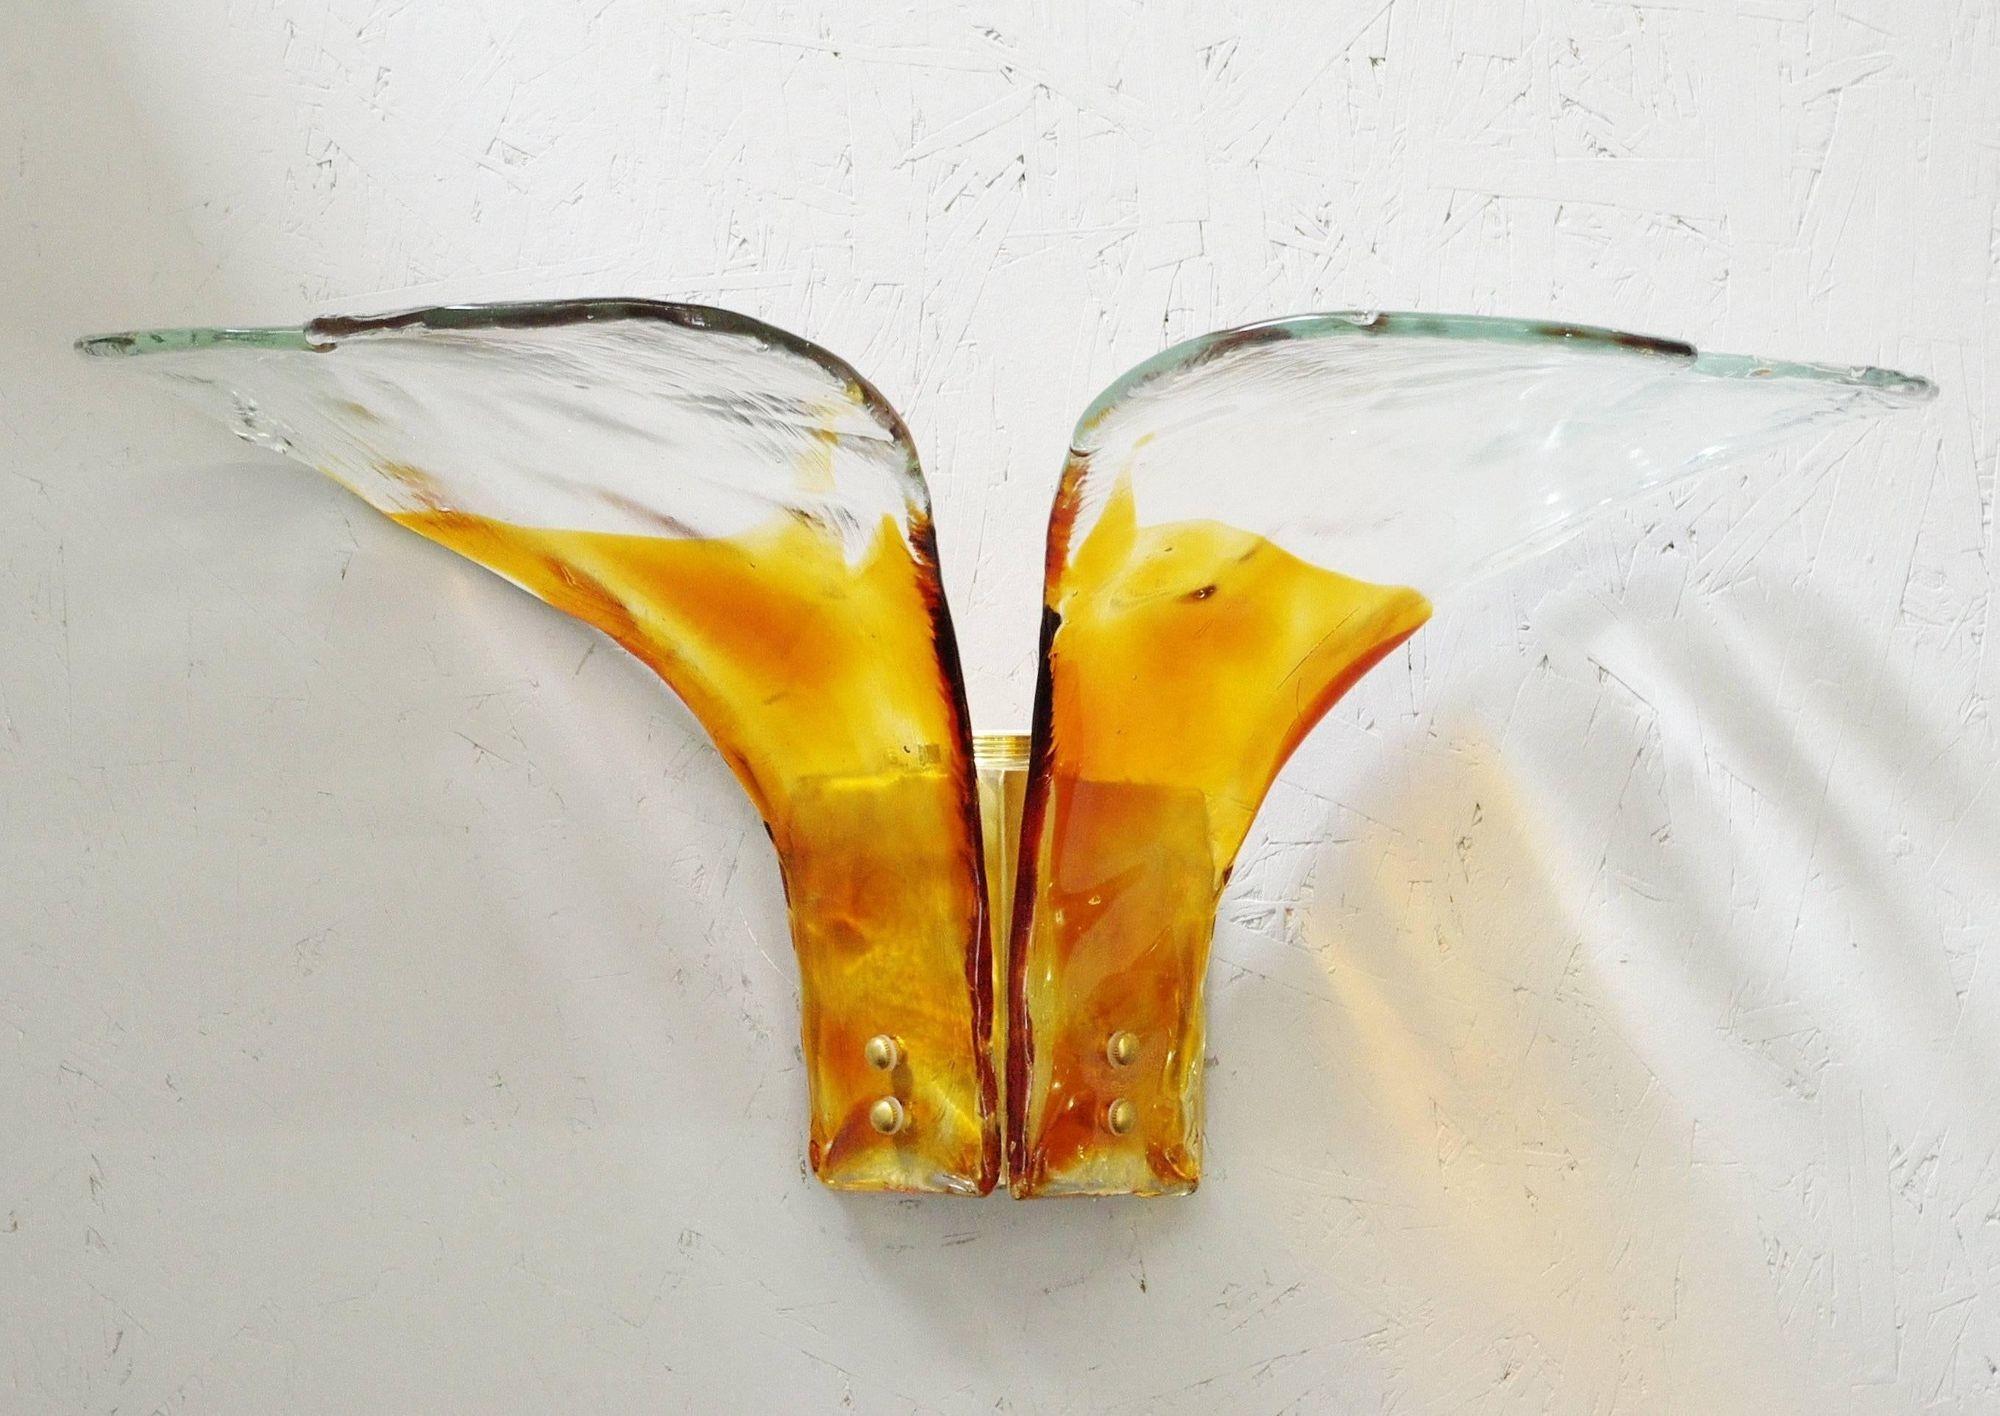 Vintage Italian sconces with hand blown amber and clear Murano glasses mounted on brass frames / Designed by Carlo Nason, circa 1960s / made in Italy 1 light / E26 or E27 type / max 40W.
Measures: height: 15 inches / width: 26 inches / depth: 13